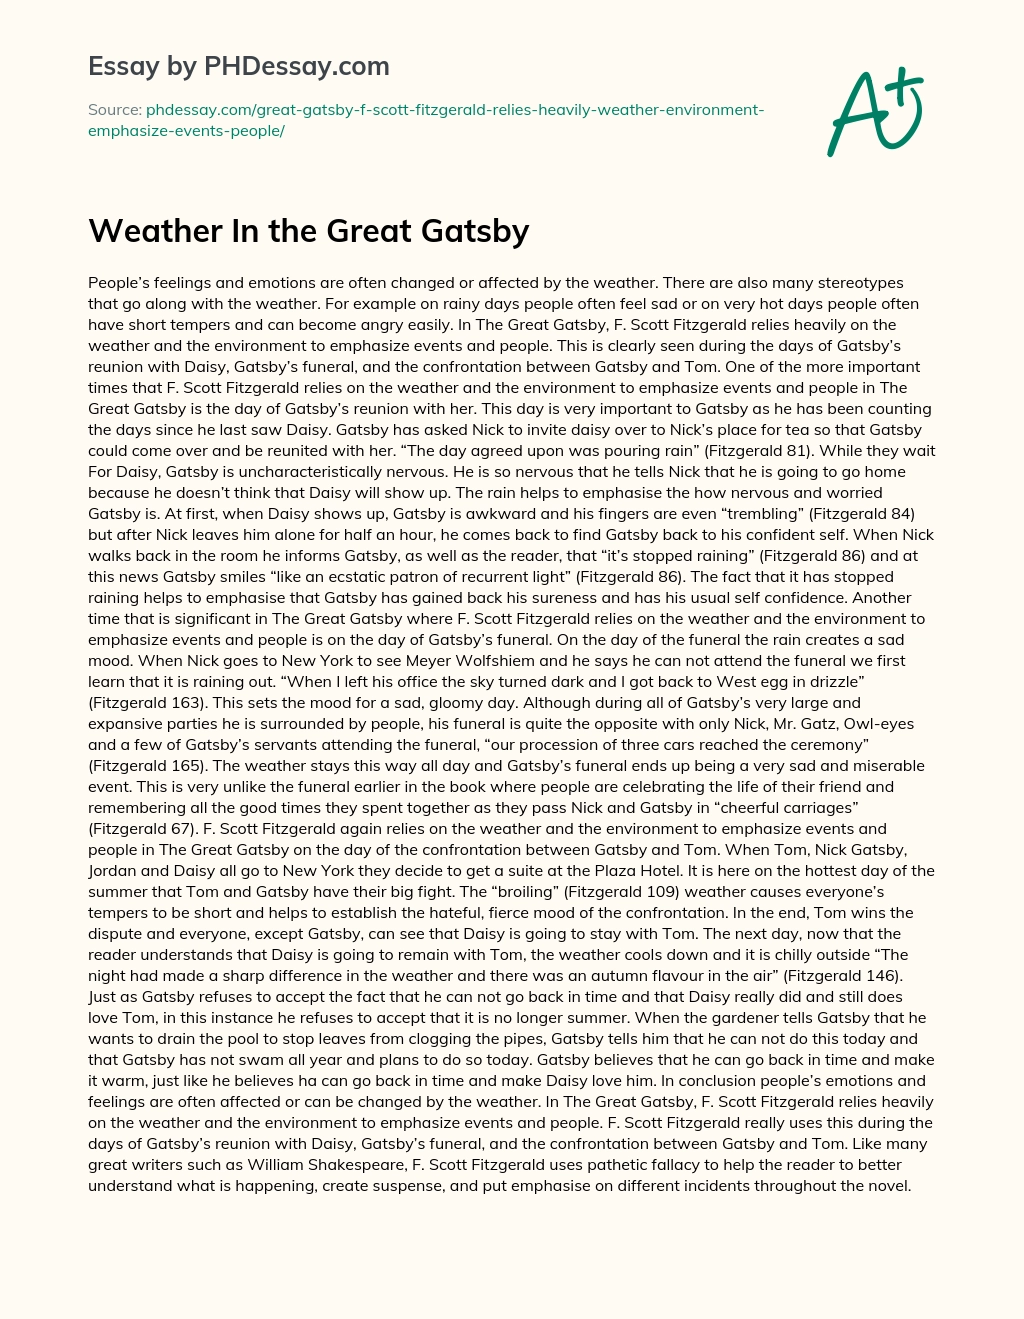 Weather In the Great Gatsby essay